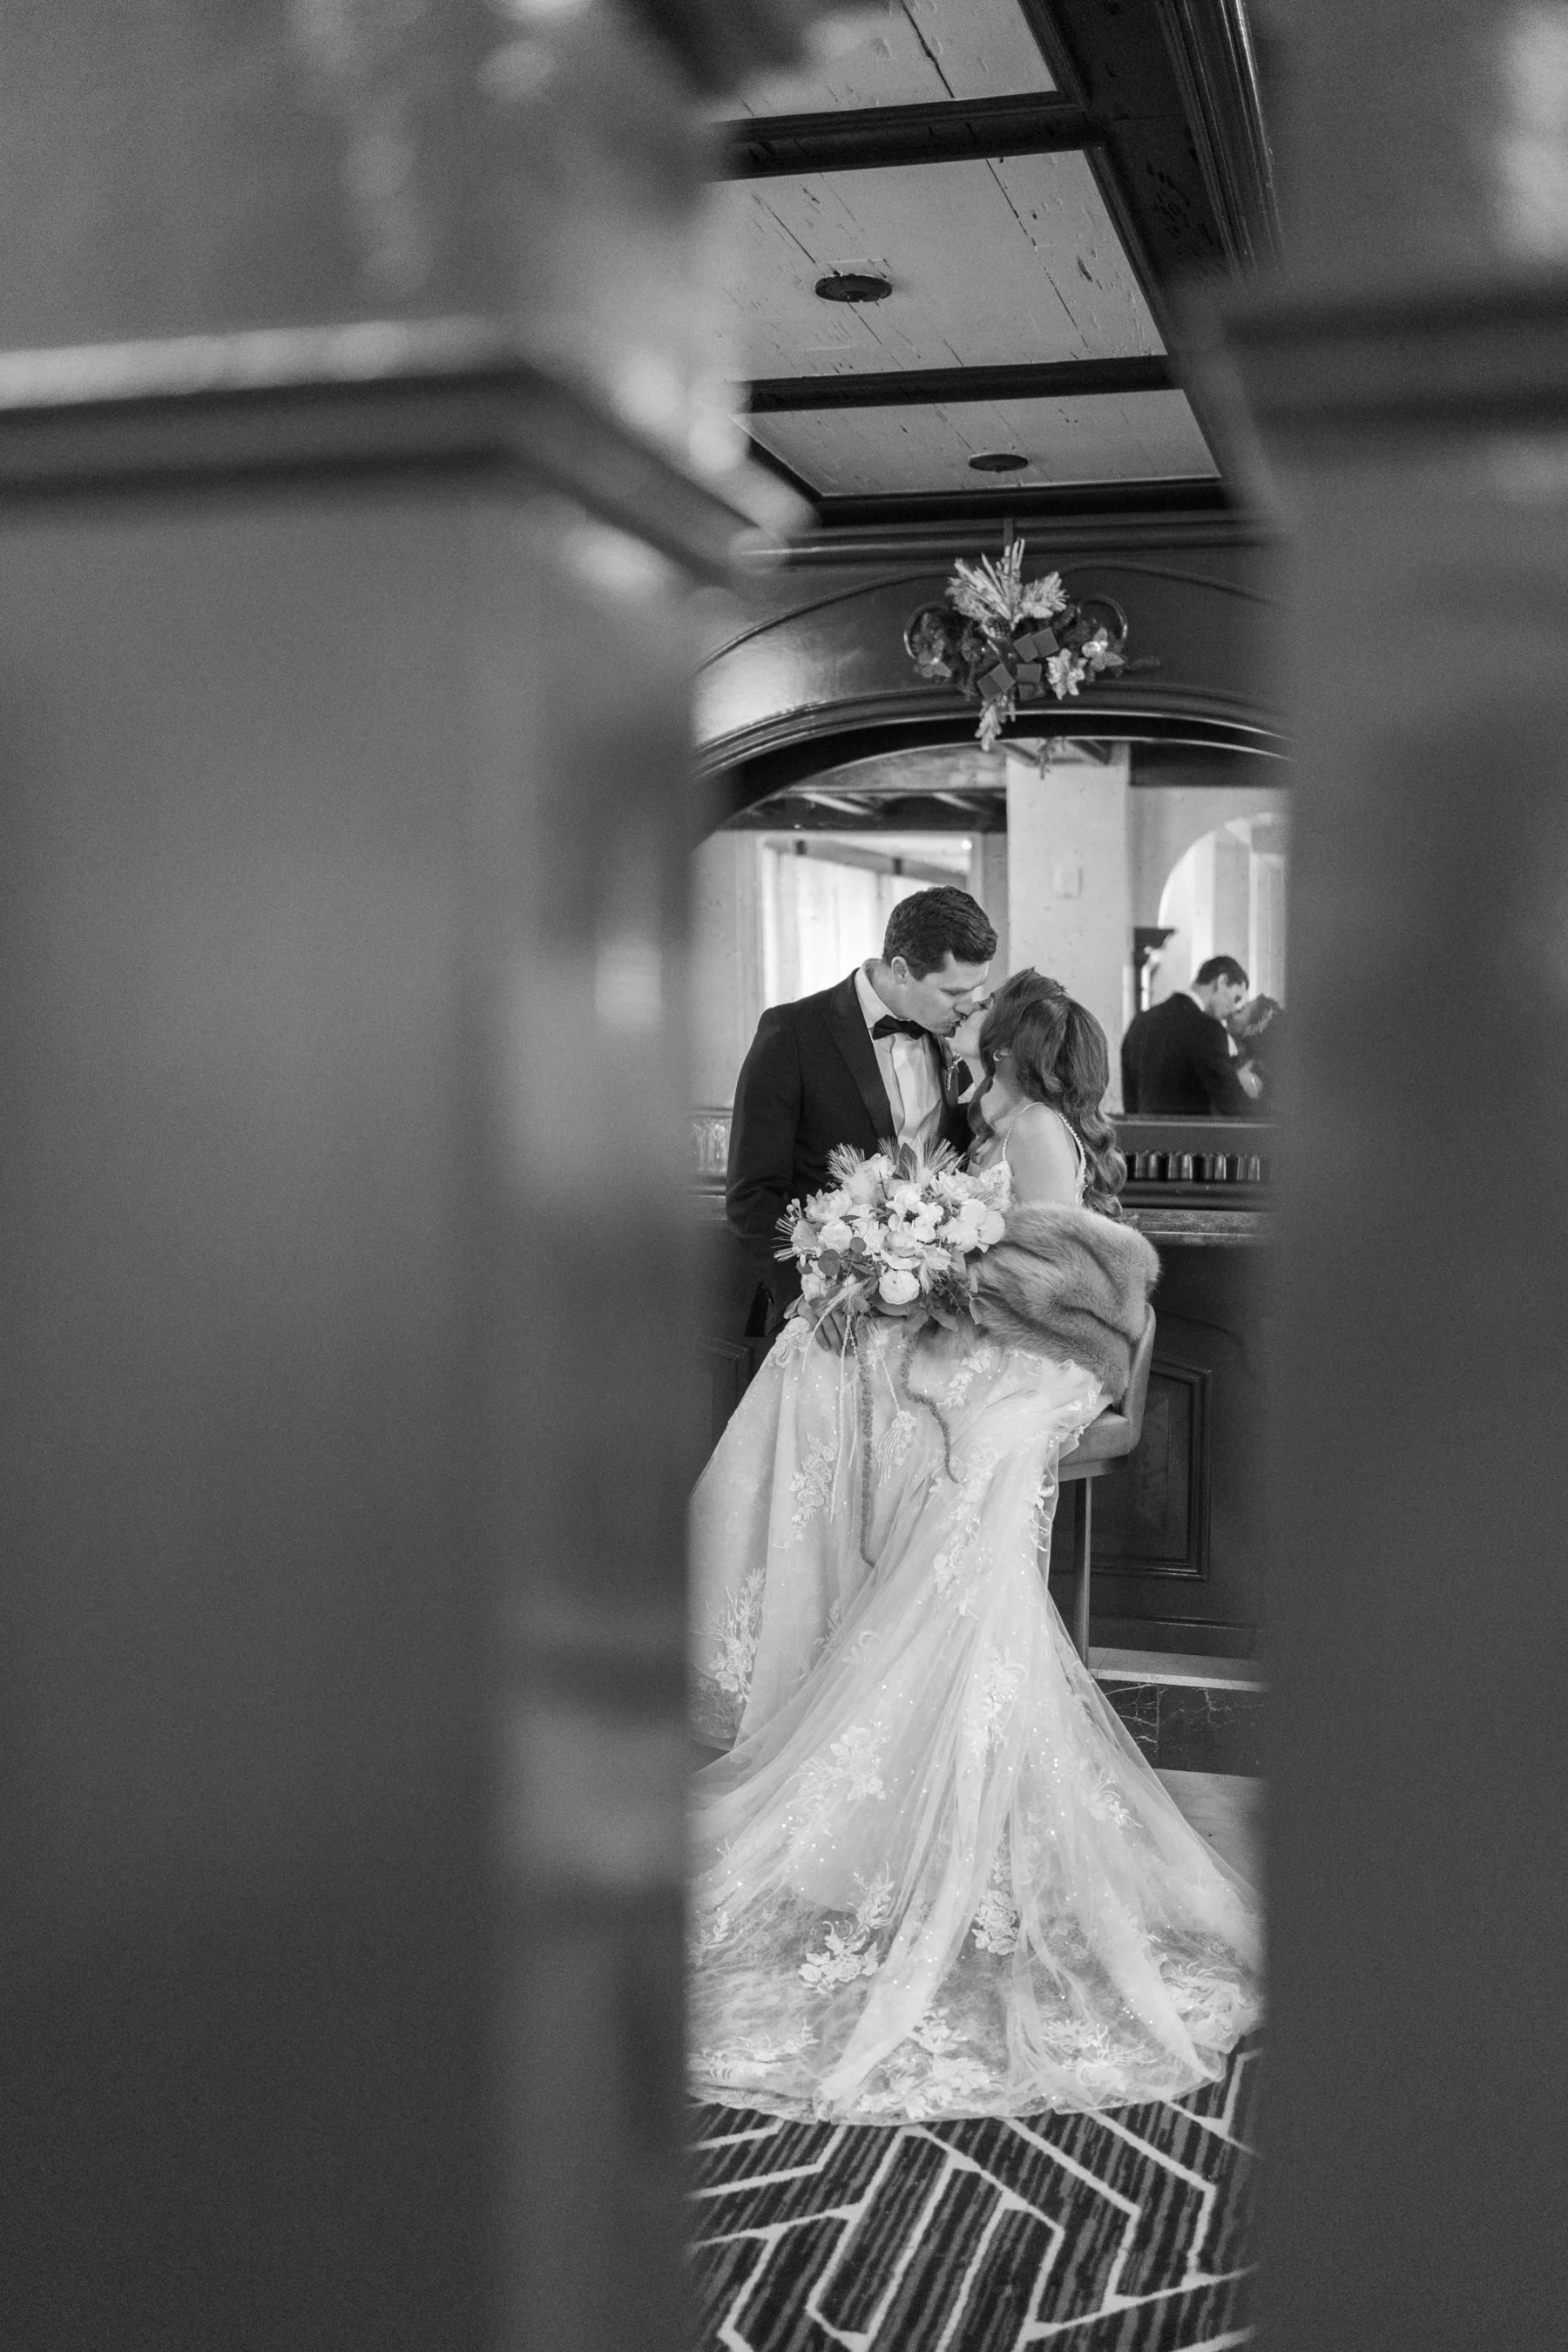 Romantic Bride and Groom Black and White Wedding Portrait | Tampa Bay Content Creator Behind The Vows | Photography Eddy Almaguer Photography | Videographer Priceless Studio Design | Boutique Truly Forever Bridal Tampa